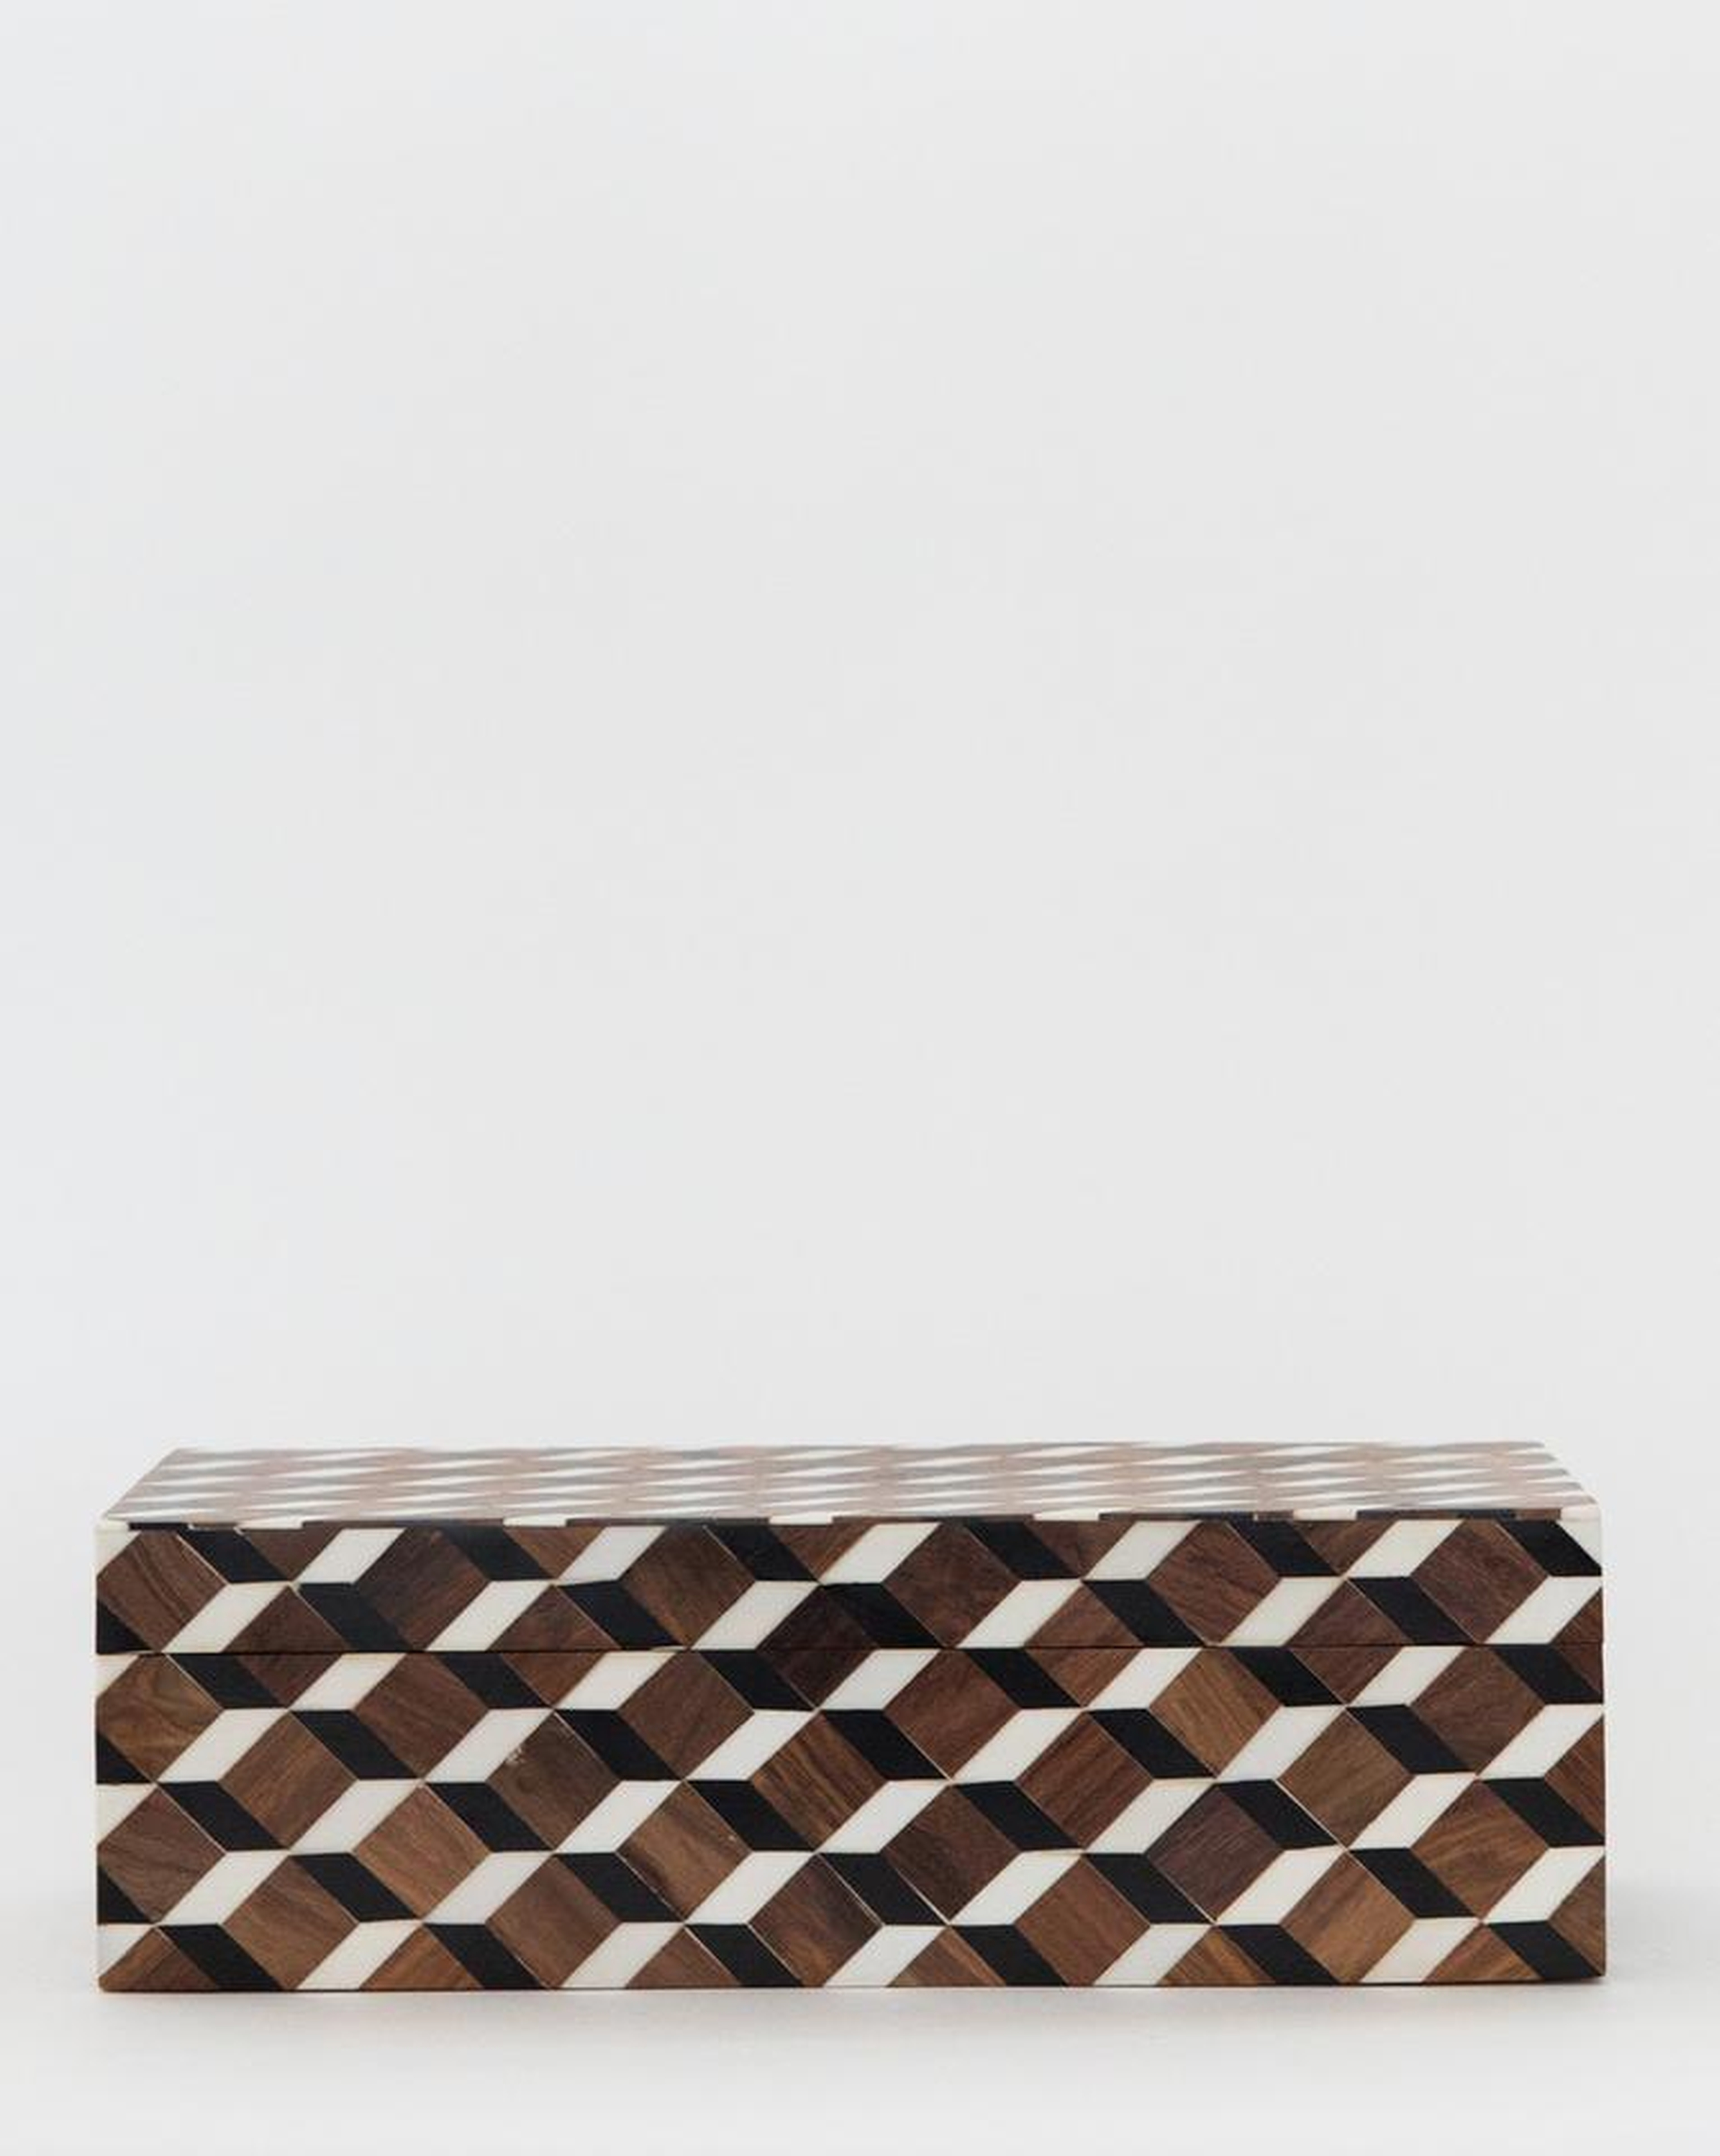 ARMO PATTERNED BOX - McGee & Co.